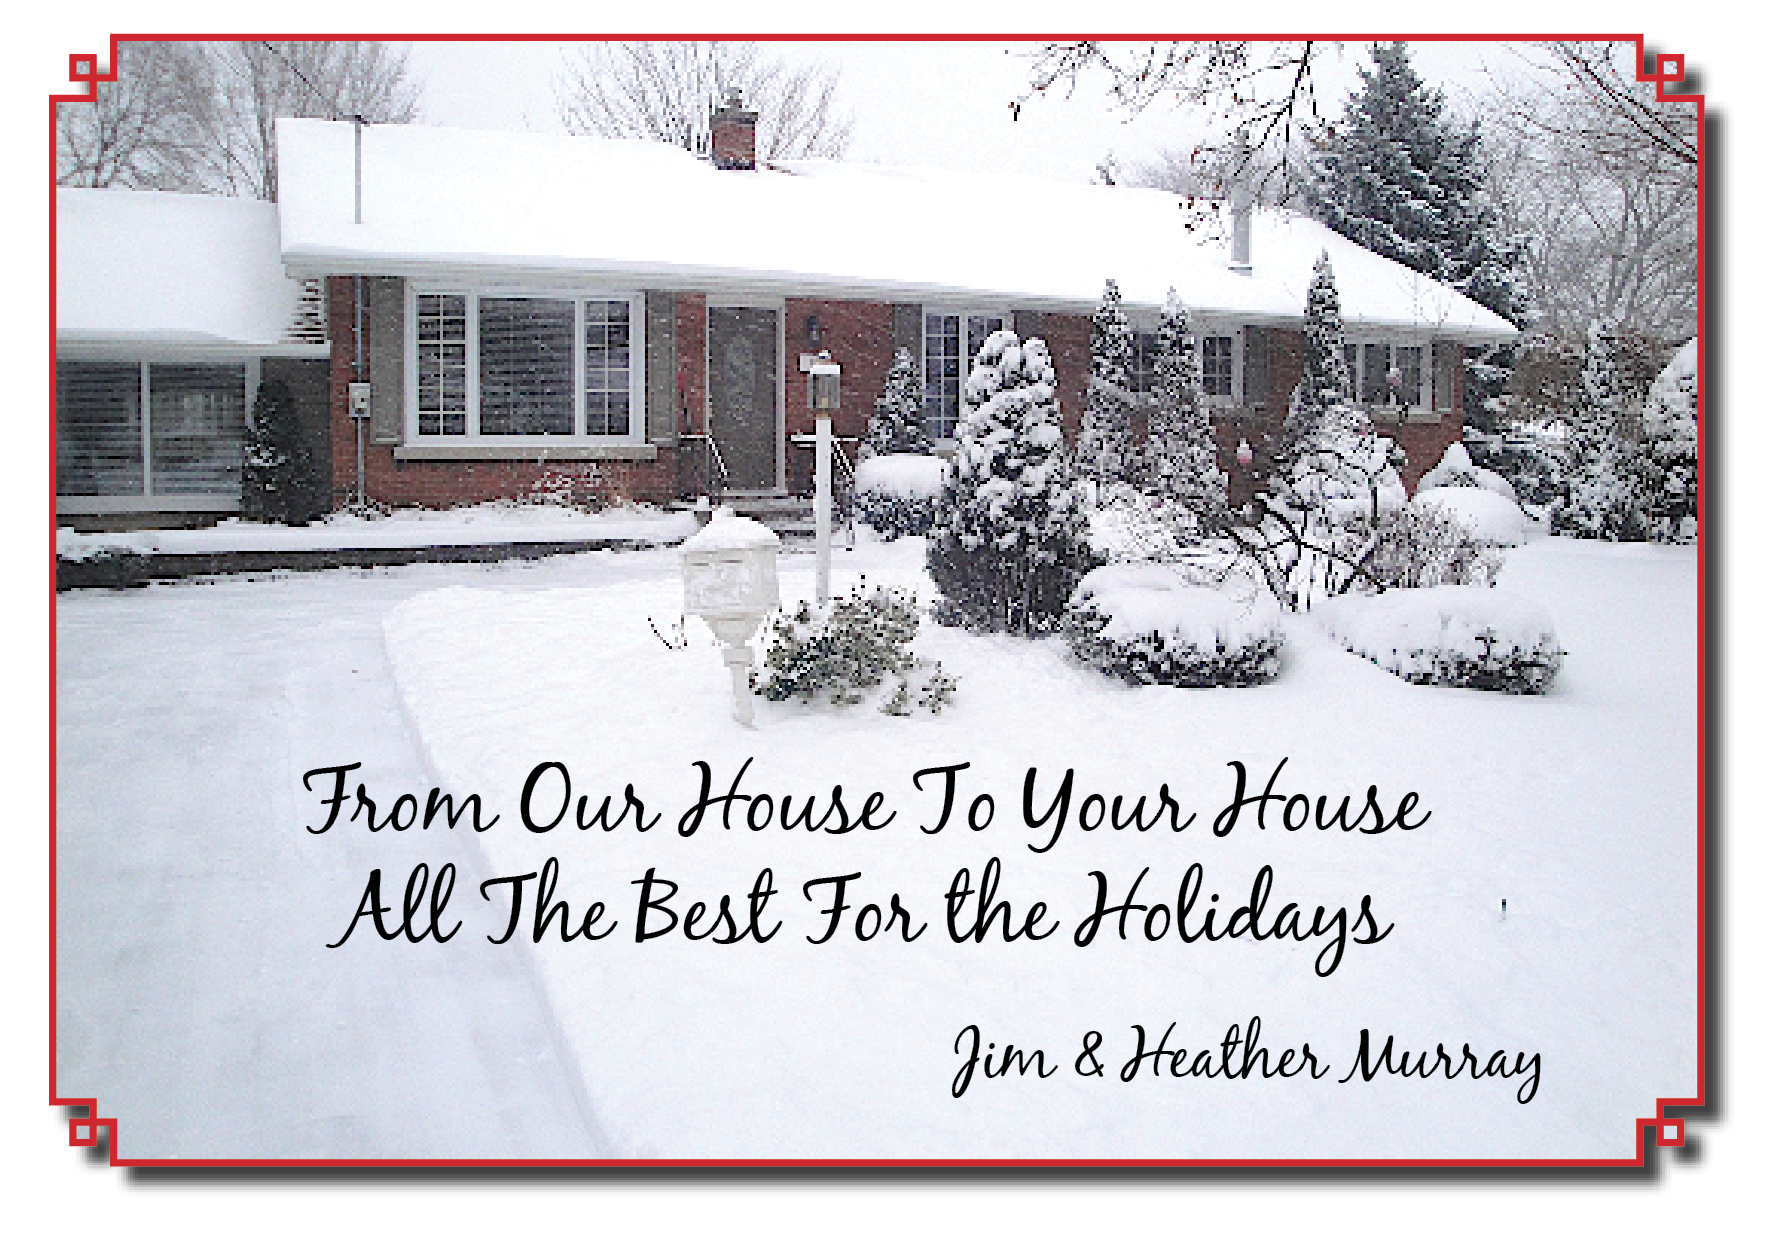 EF

From Our House To Your House

AY The Best, Fon the Holidays,
Jim & Heather Murray